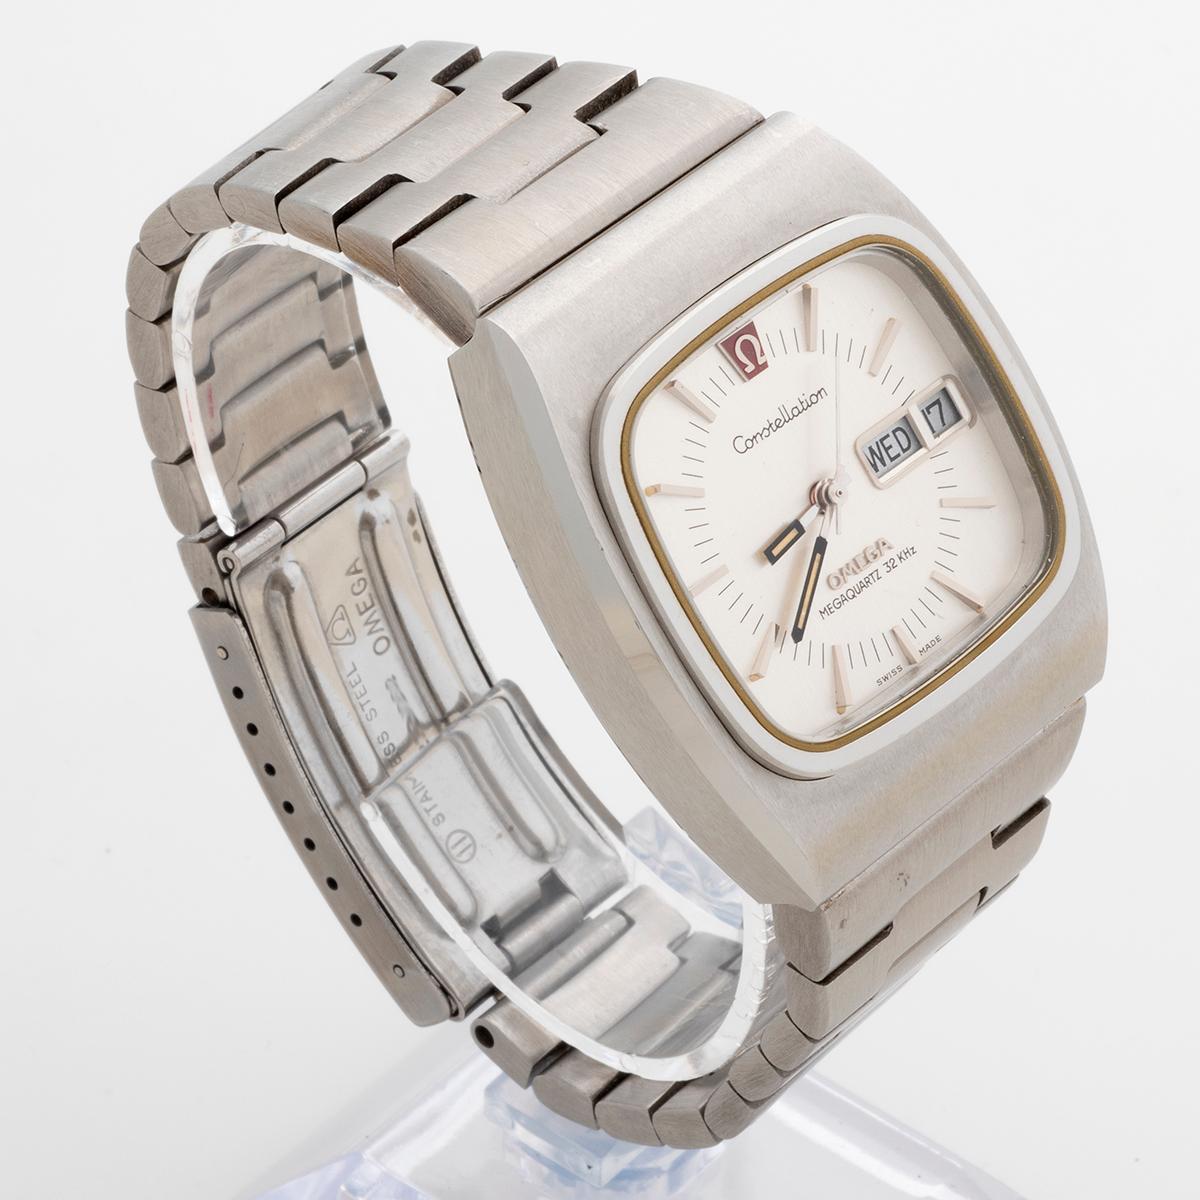 Our vintage and rare Omega Constellation Omega Constellation Megaquartz 32KHZ (electronic) with 1310 cal movement, dual reference 19600162960811, has the desirable TV screen style case and features a day and date complication. This example is